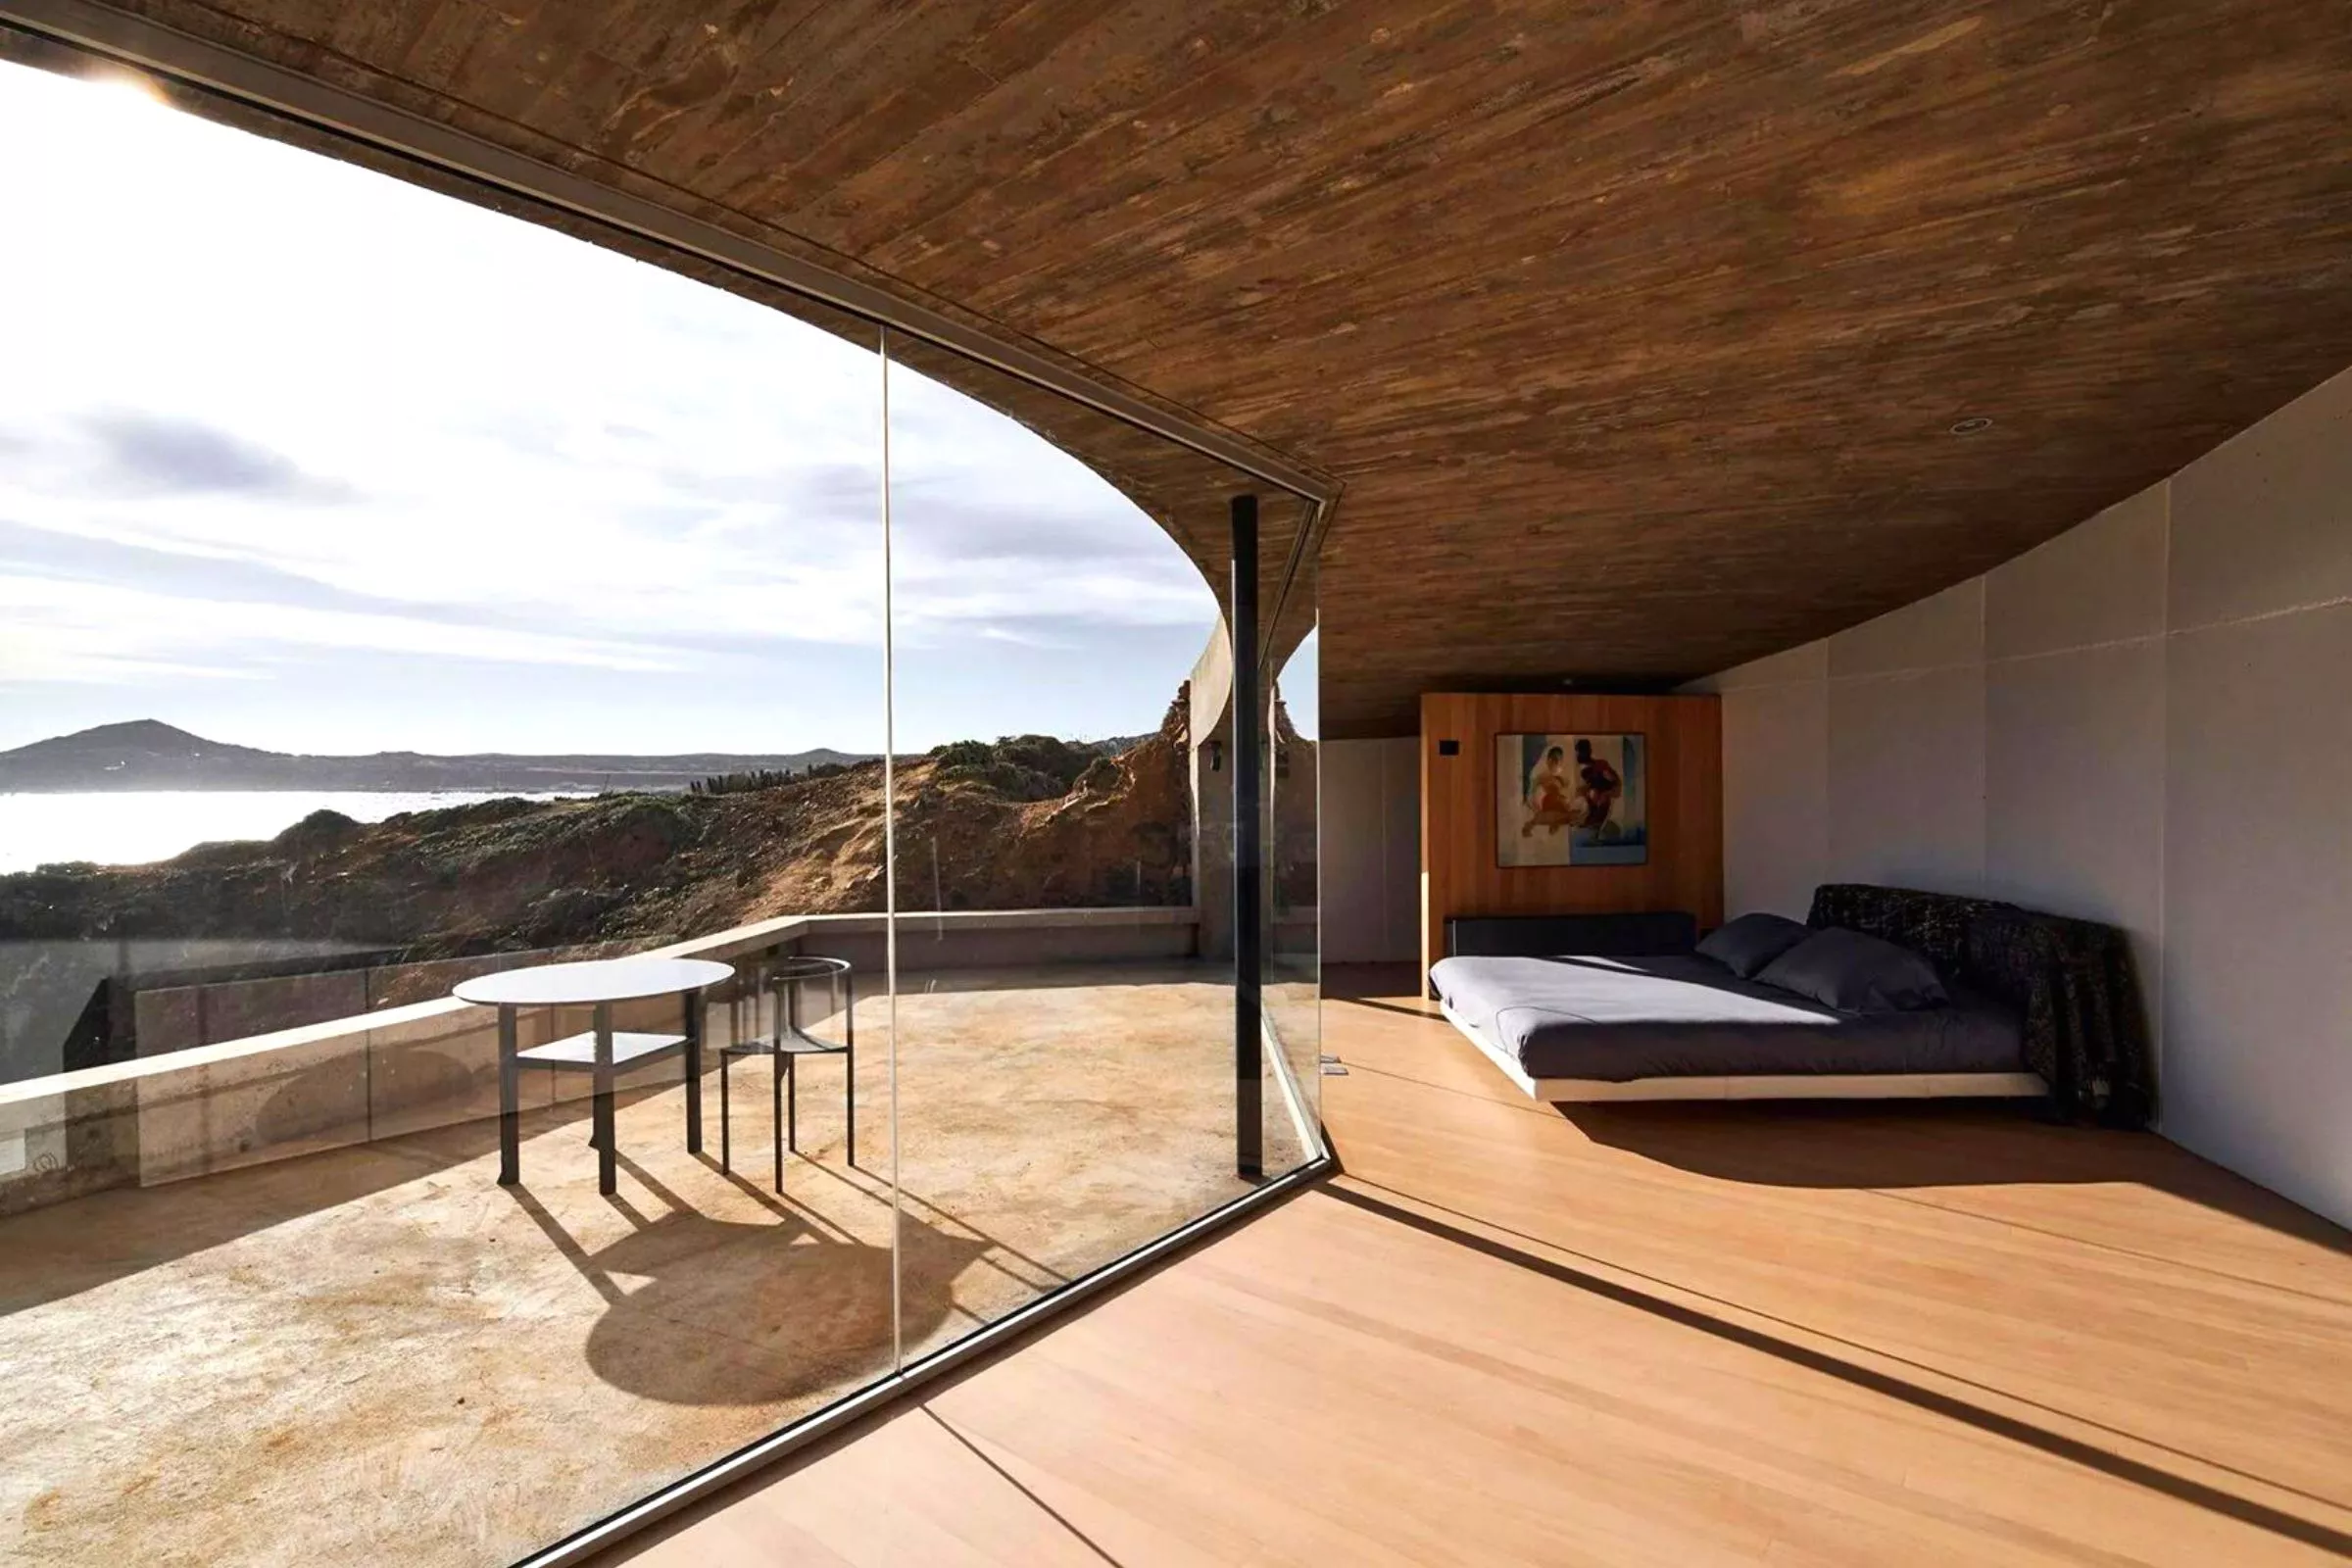 House in chile with nature view